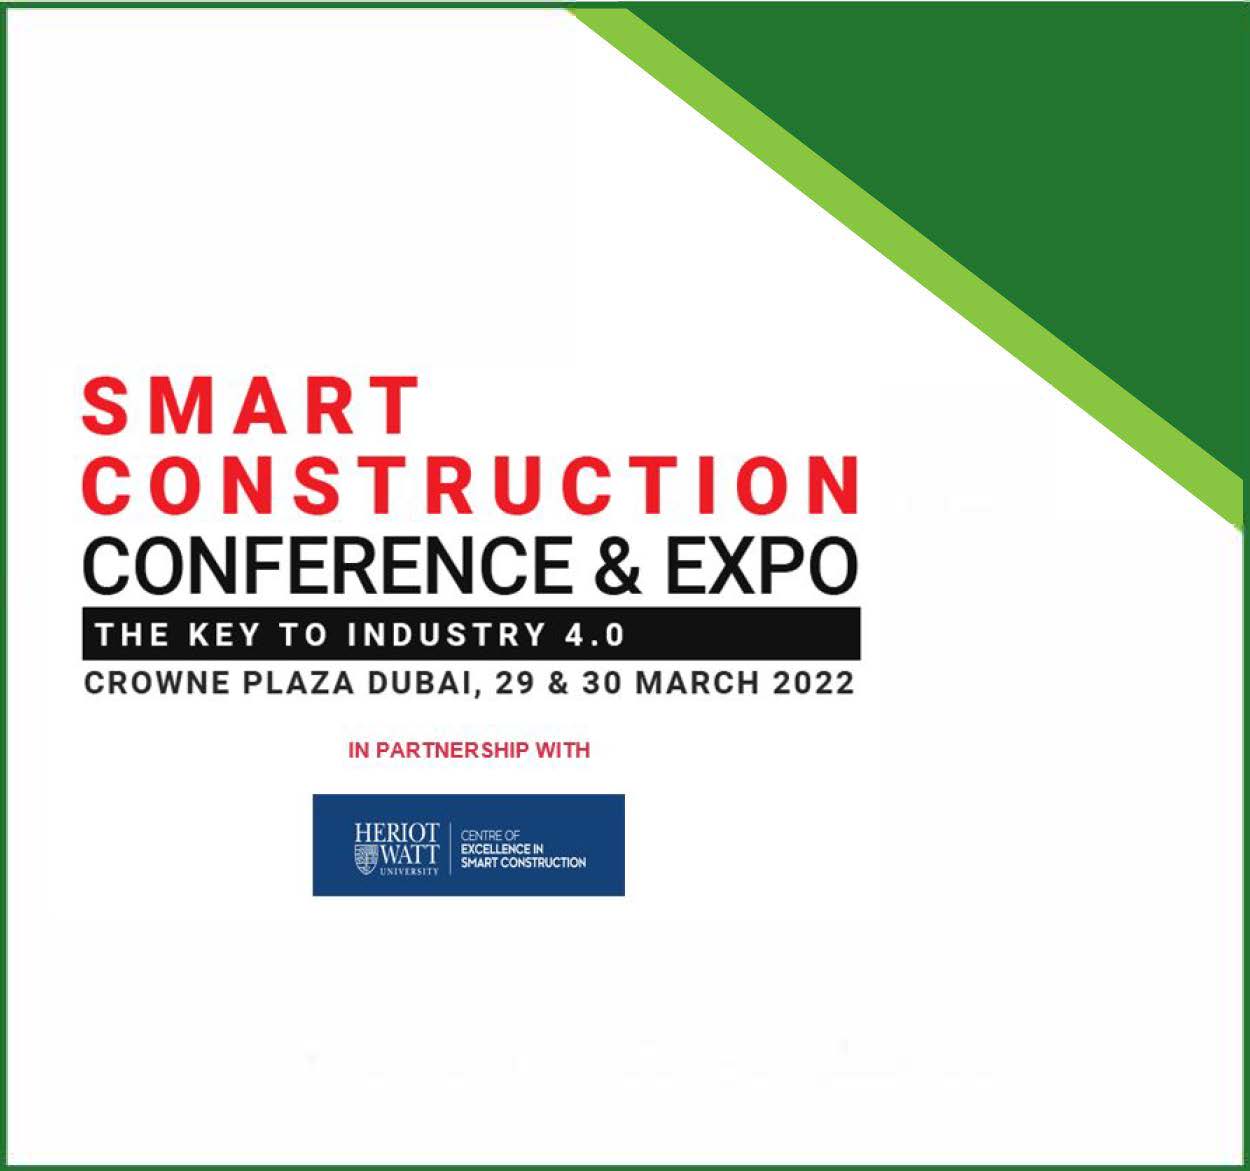 SMART CONSTRUCTION STARTS HERE!